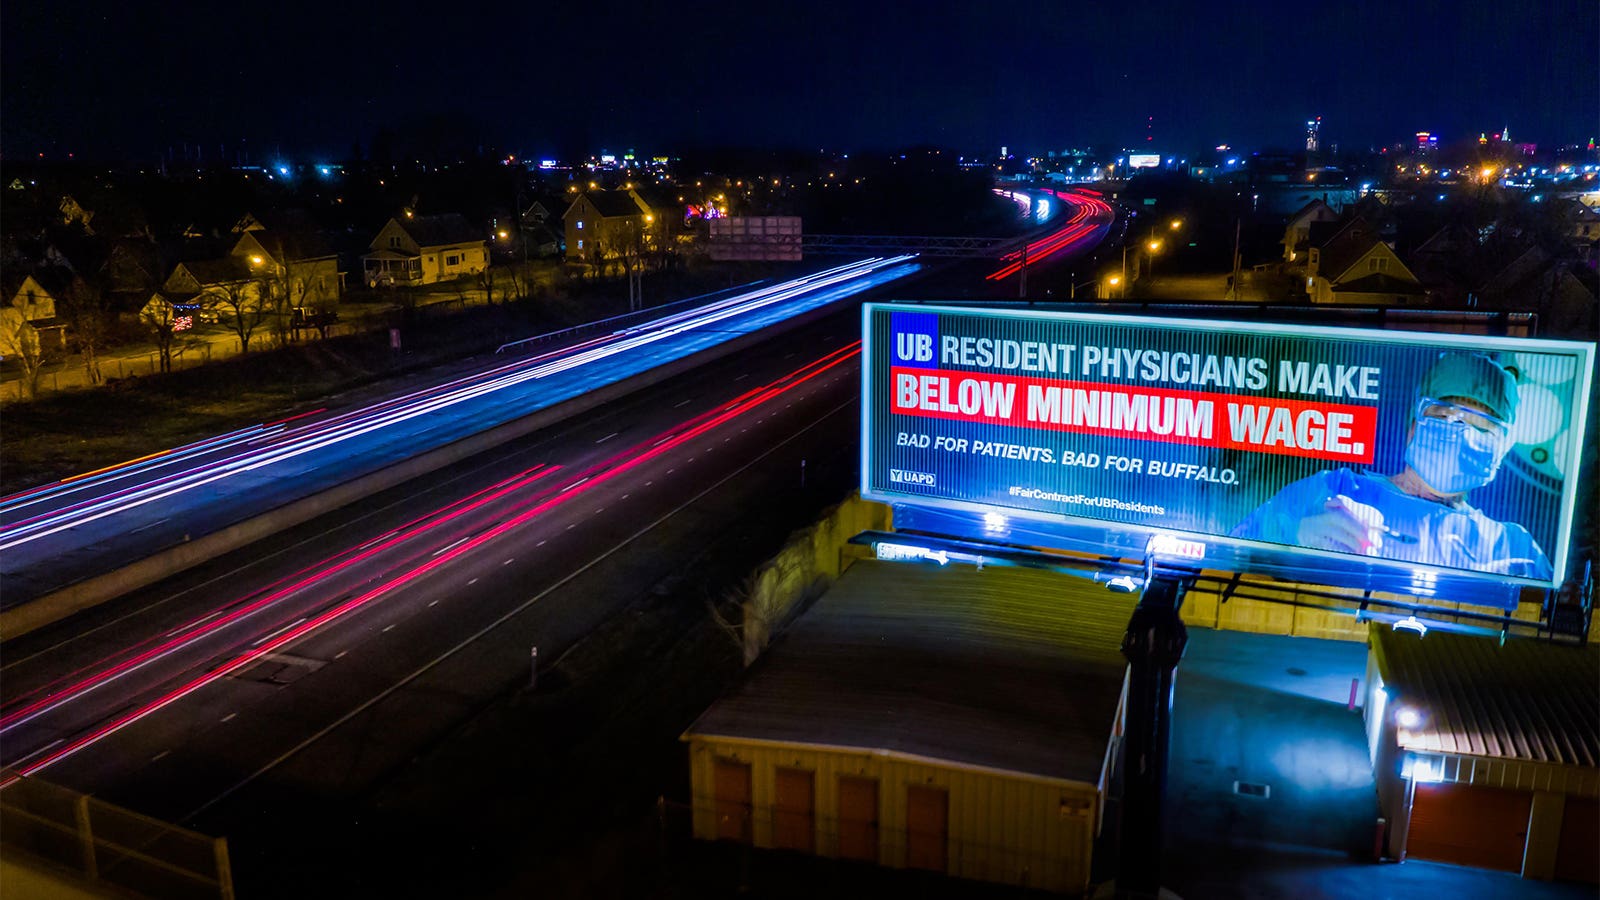 In Billboard Campaign, Physician Residents Allege They’re Exploited